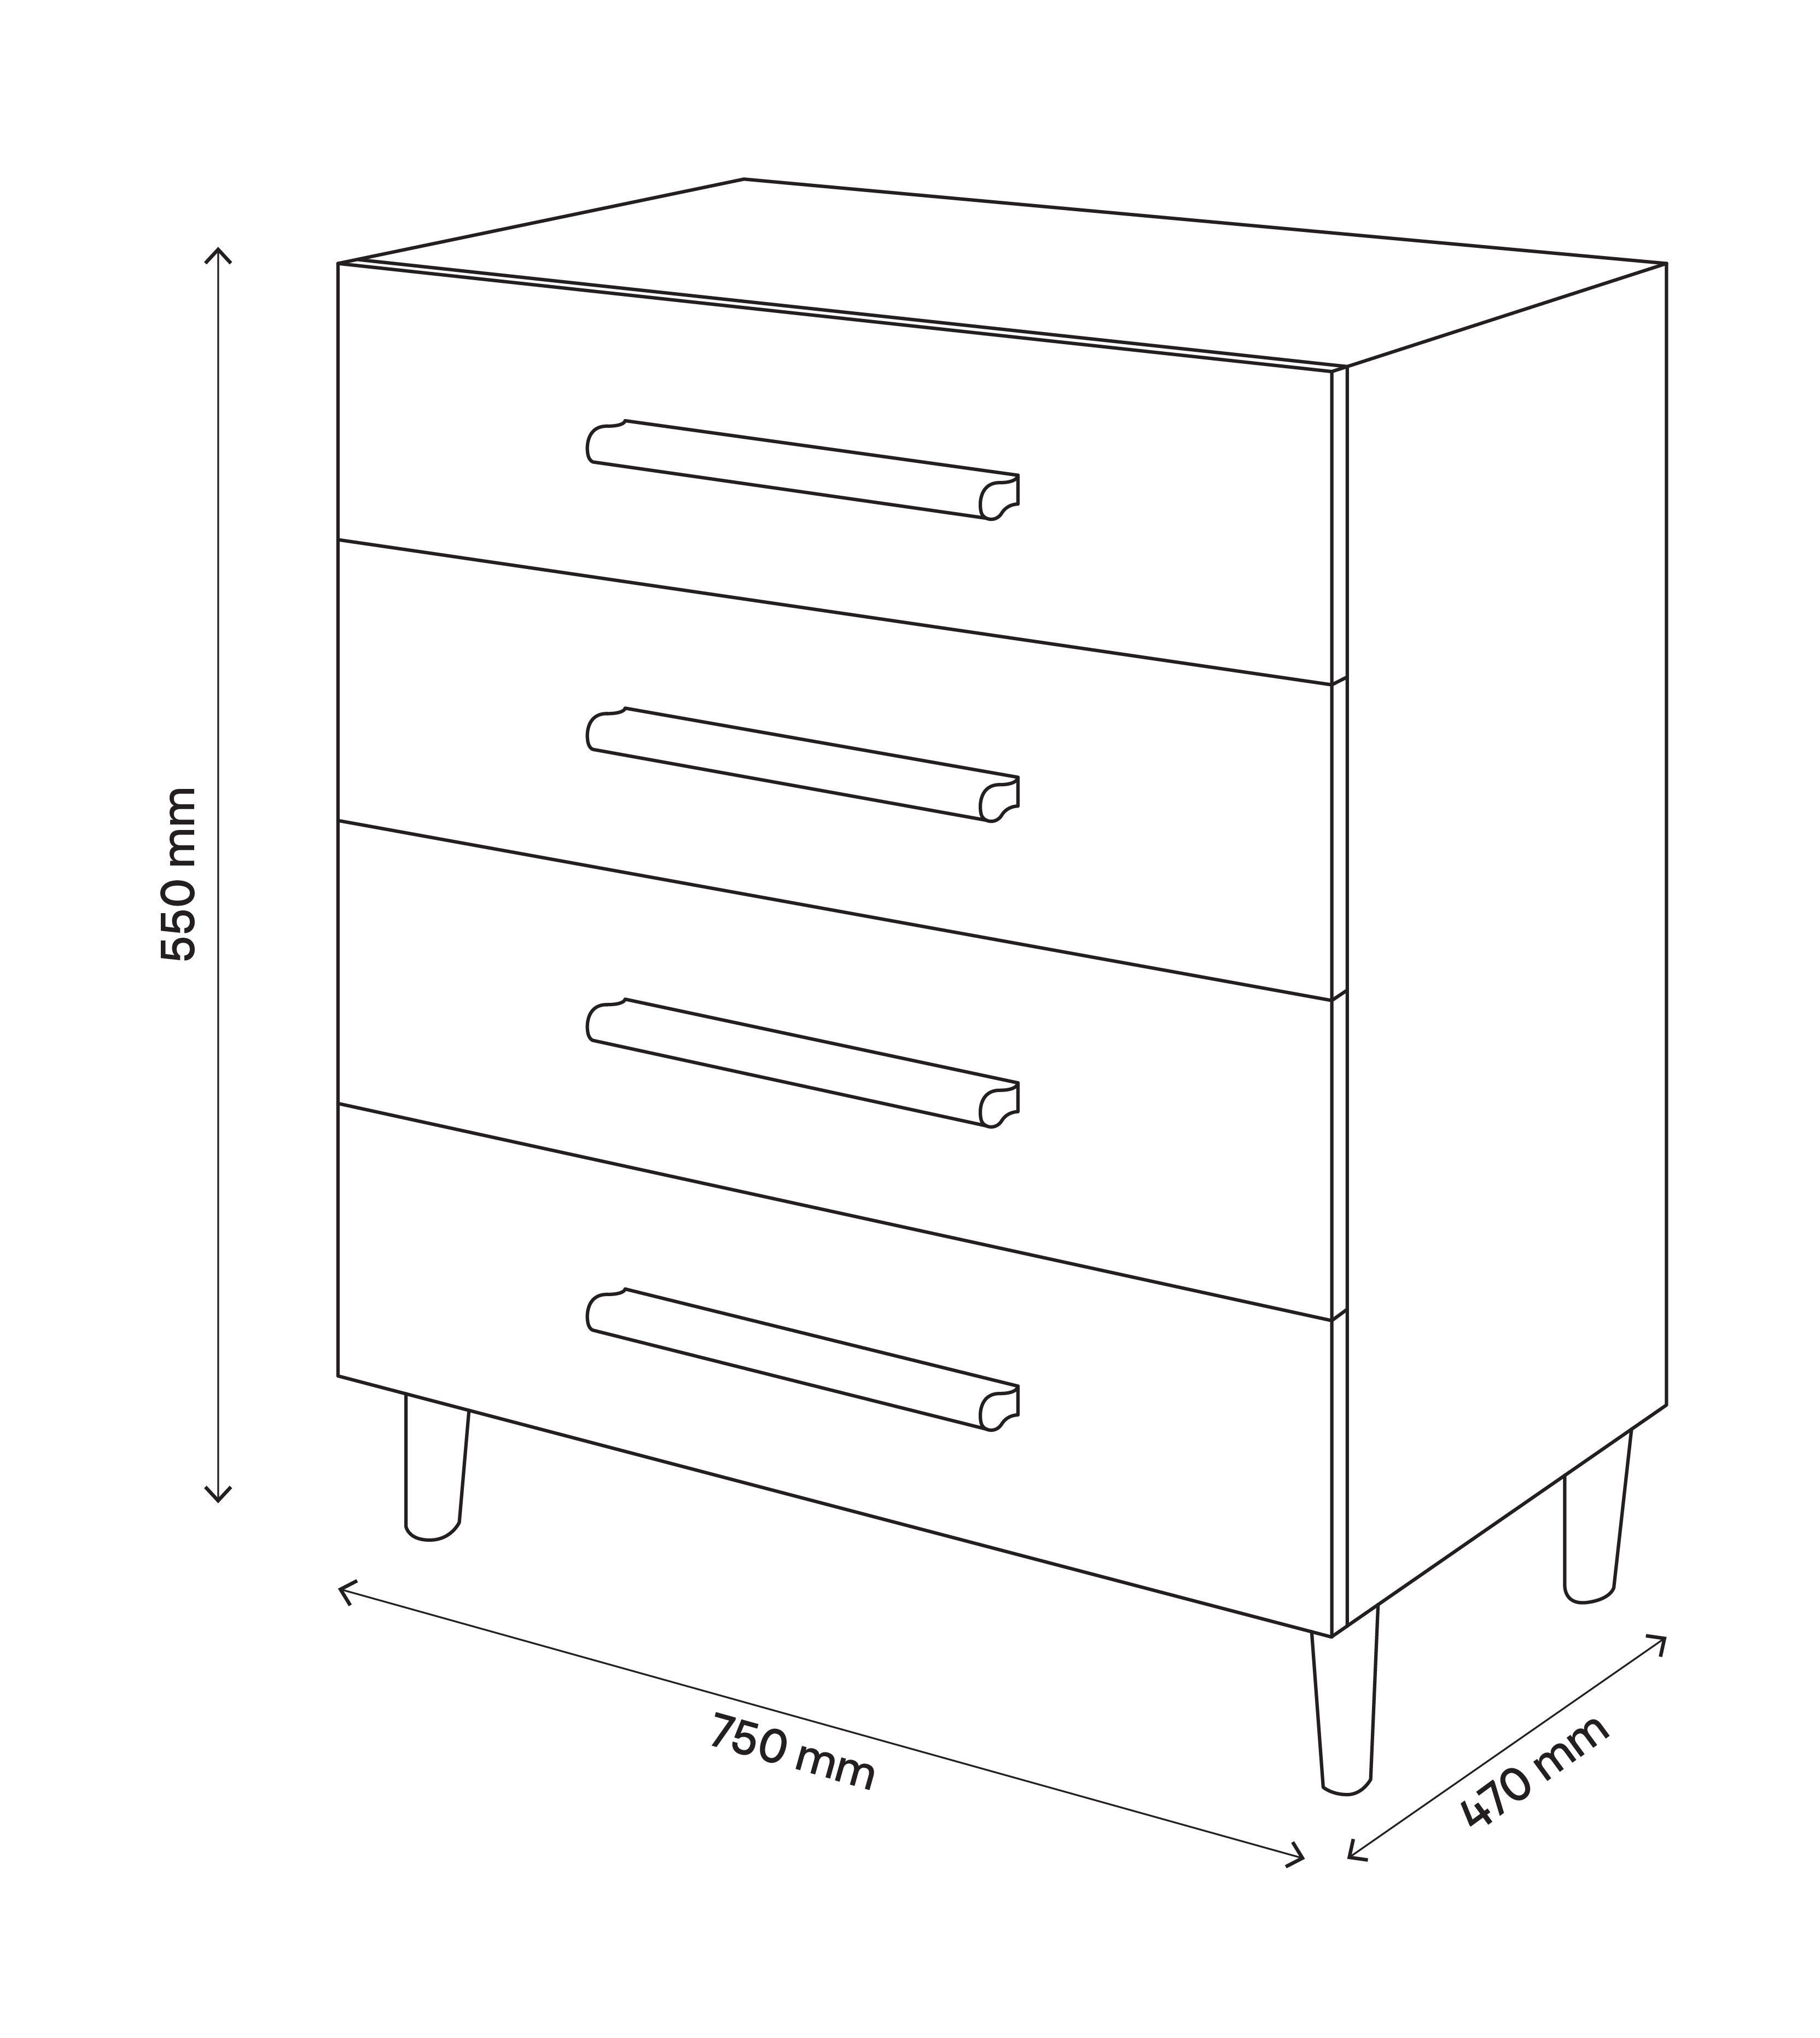 Atomia Freestanding White oak effect 4 Drawer Chest of drawers (H)550mm (W)750mm (D)450mm